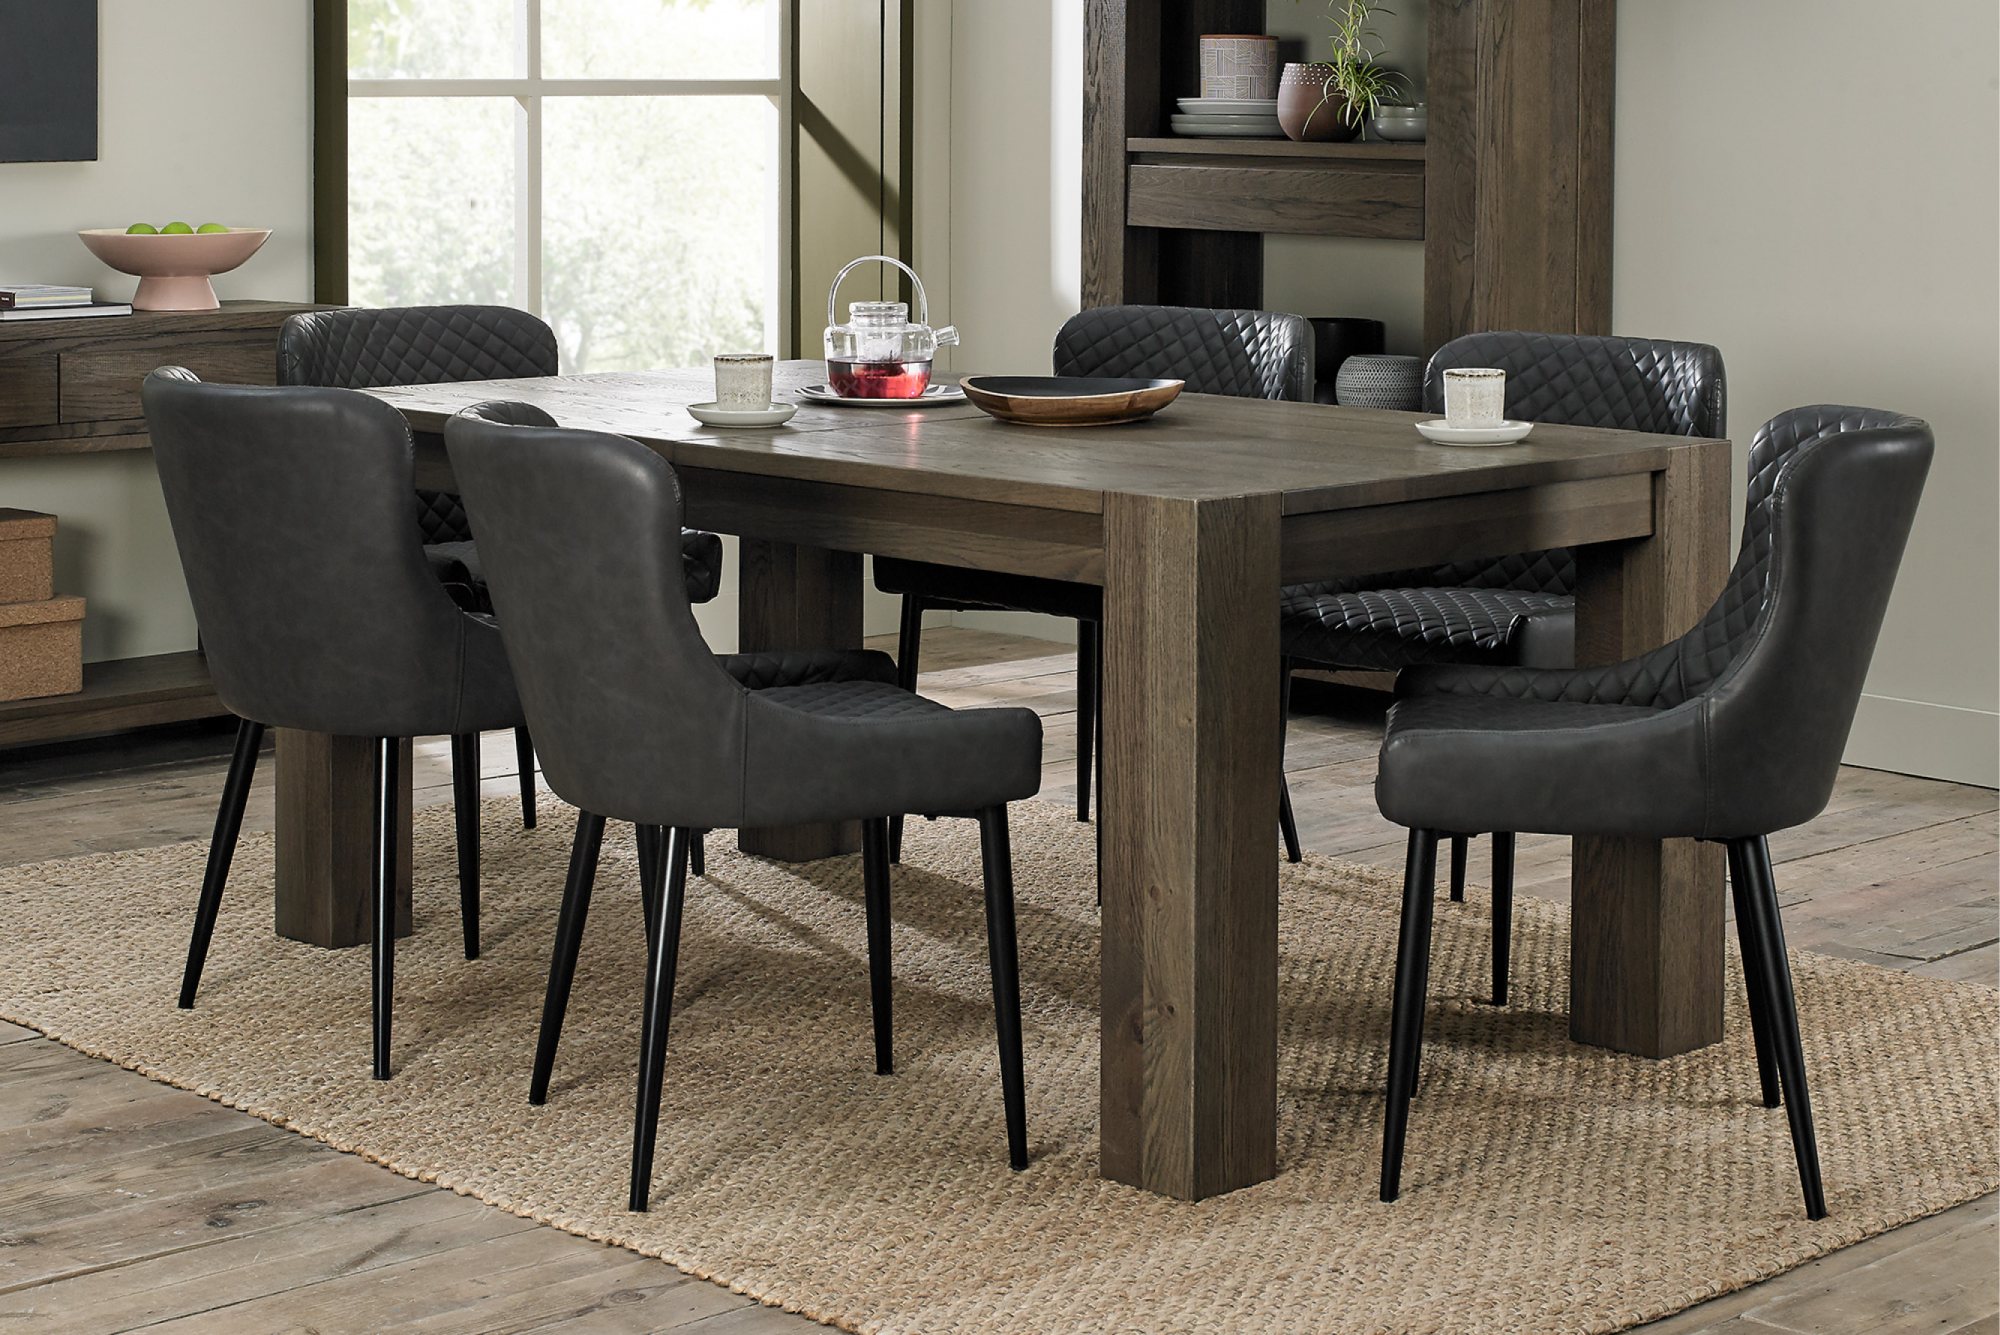 Home Origins Constable Fumed Oak 6-8 Seater Extending Dining Set- 6 Cezanne Dining Chairs- Dark Grey Faux Leather